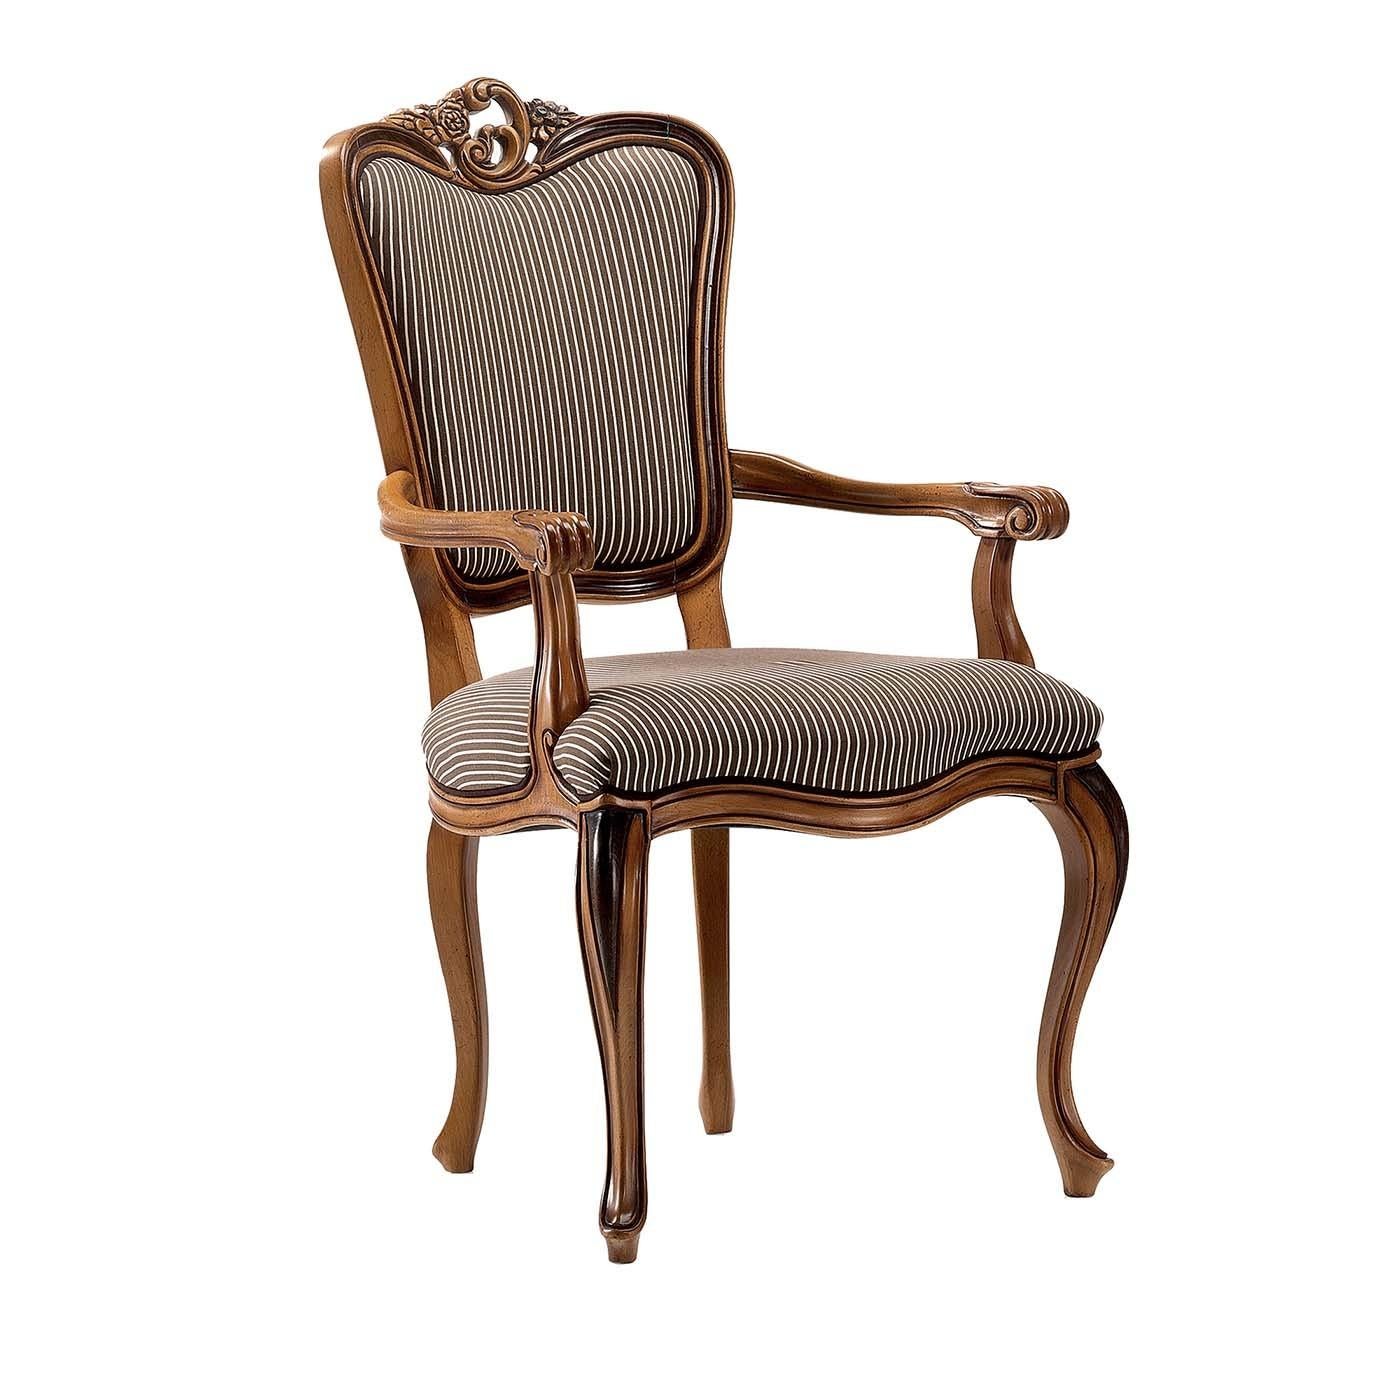 A superb homage to the Louis XV chair, this elegant chair with armrests is a splendid addition to showcase in a Classic interior as a dining chair, near a study desk, or as an accent piece in an entryway. Its elegant allure comes from the ornate